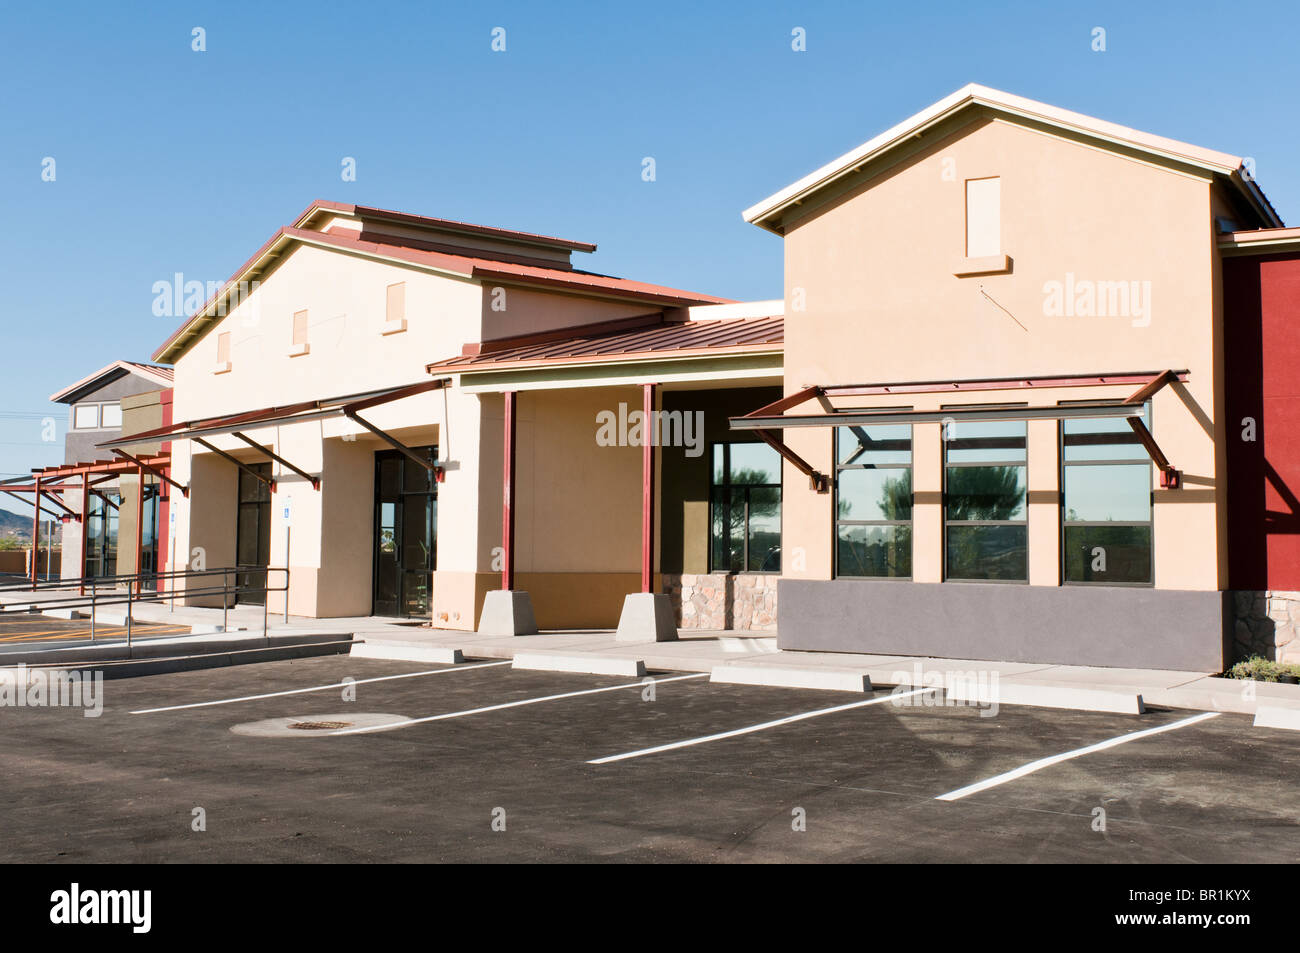 A new retail strip mall is nearing completion in Arizona. Stock Photo